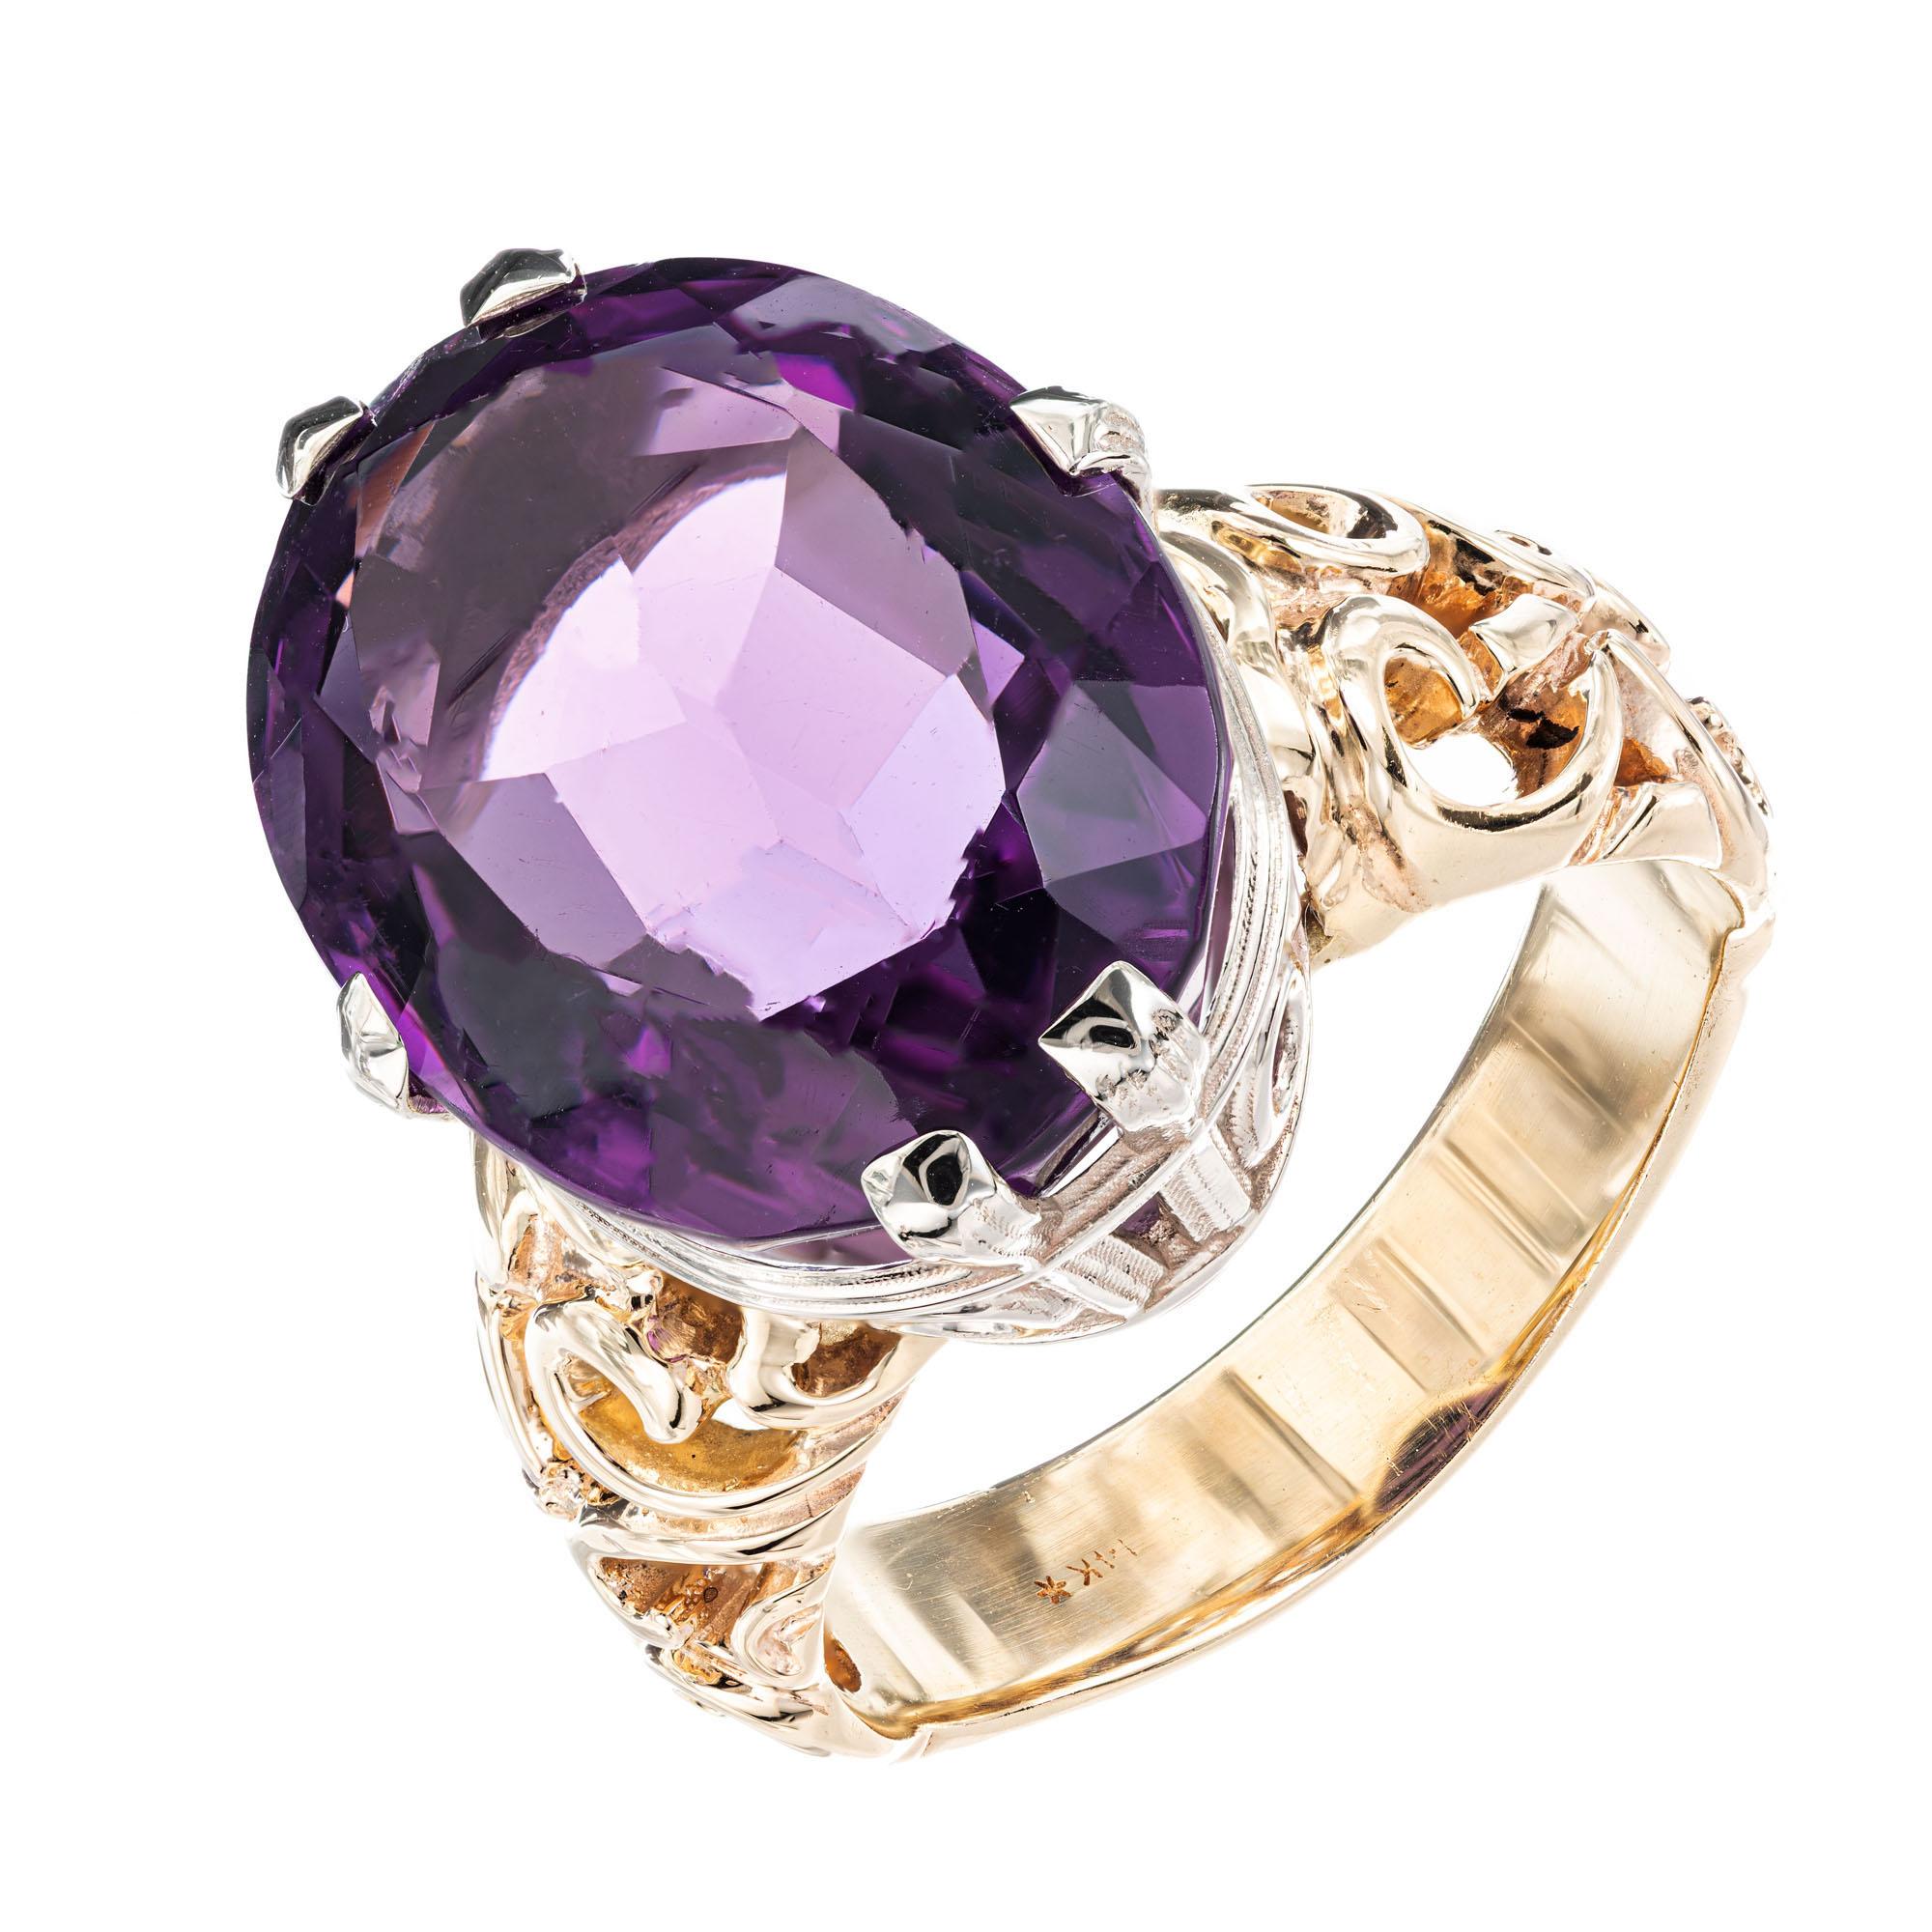 Purple oval Amethyst with a slightly reddish background color in a custom made open swirl design 14k yellow gold six prong setting. 14k white gold crown. 

1 oval Amethyst approx. total weight 18.93cts, 19.4 x 15.0mm
Size 9.5 and sizable
14k Yellow